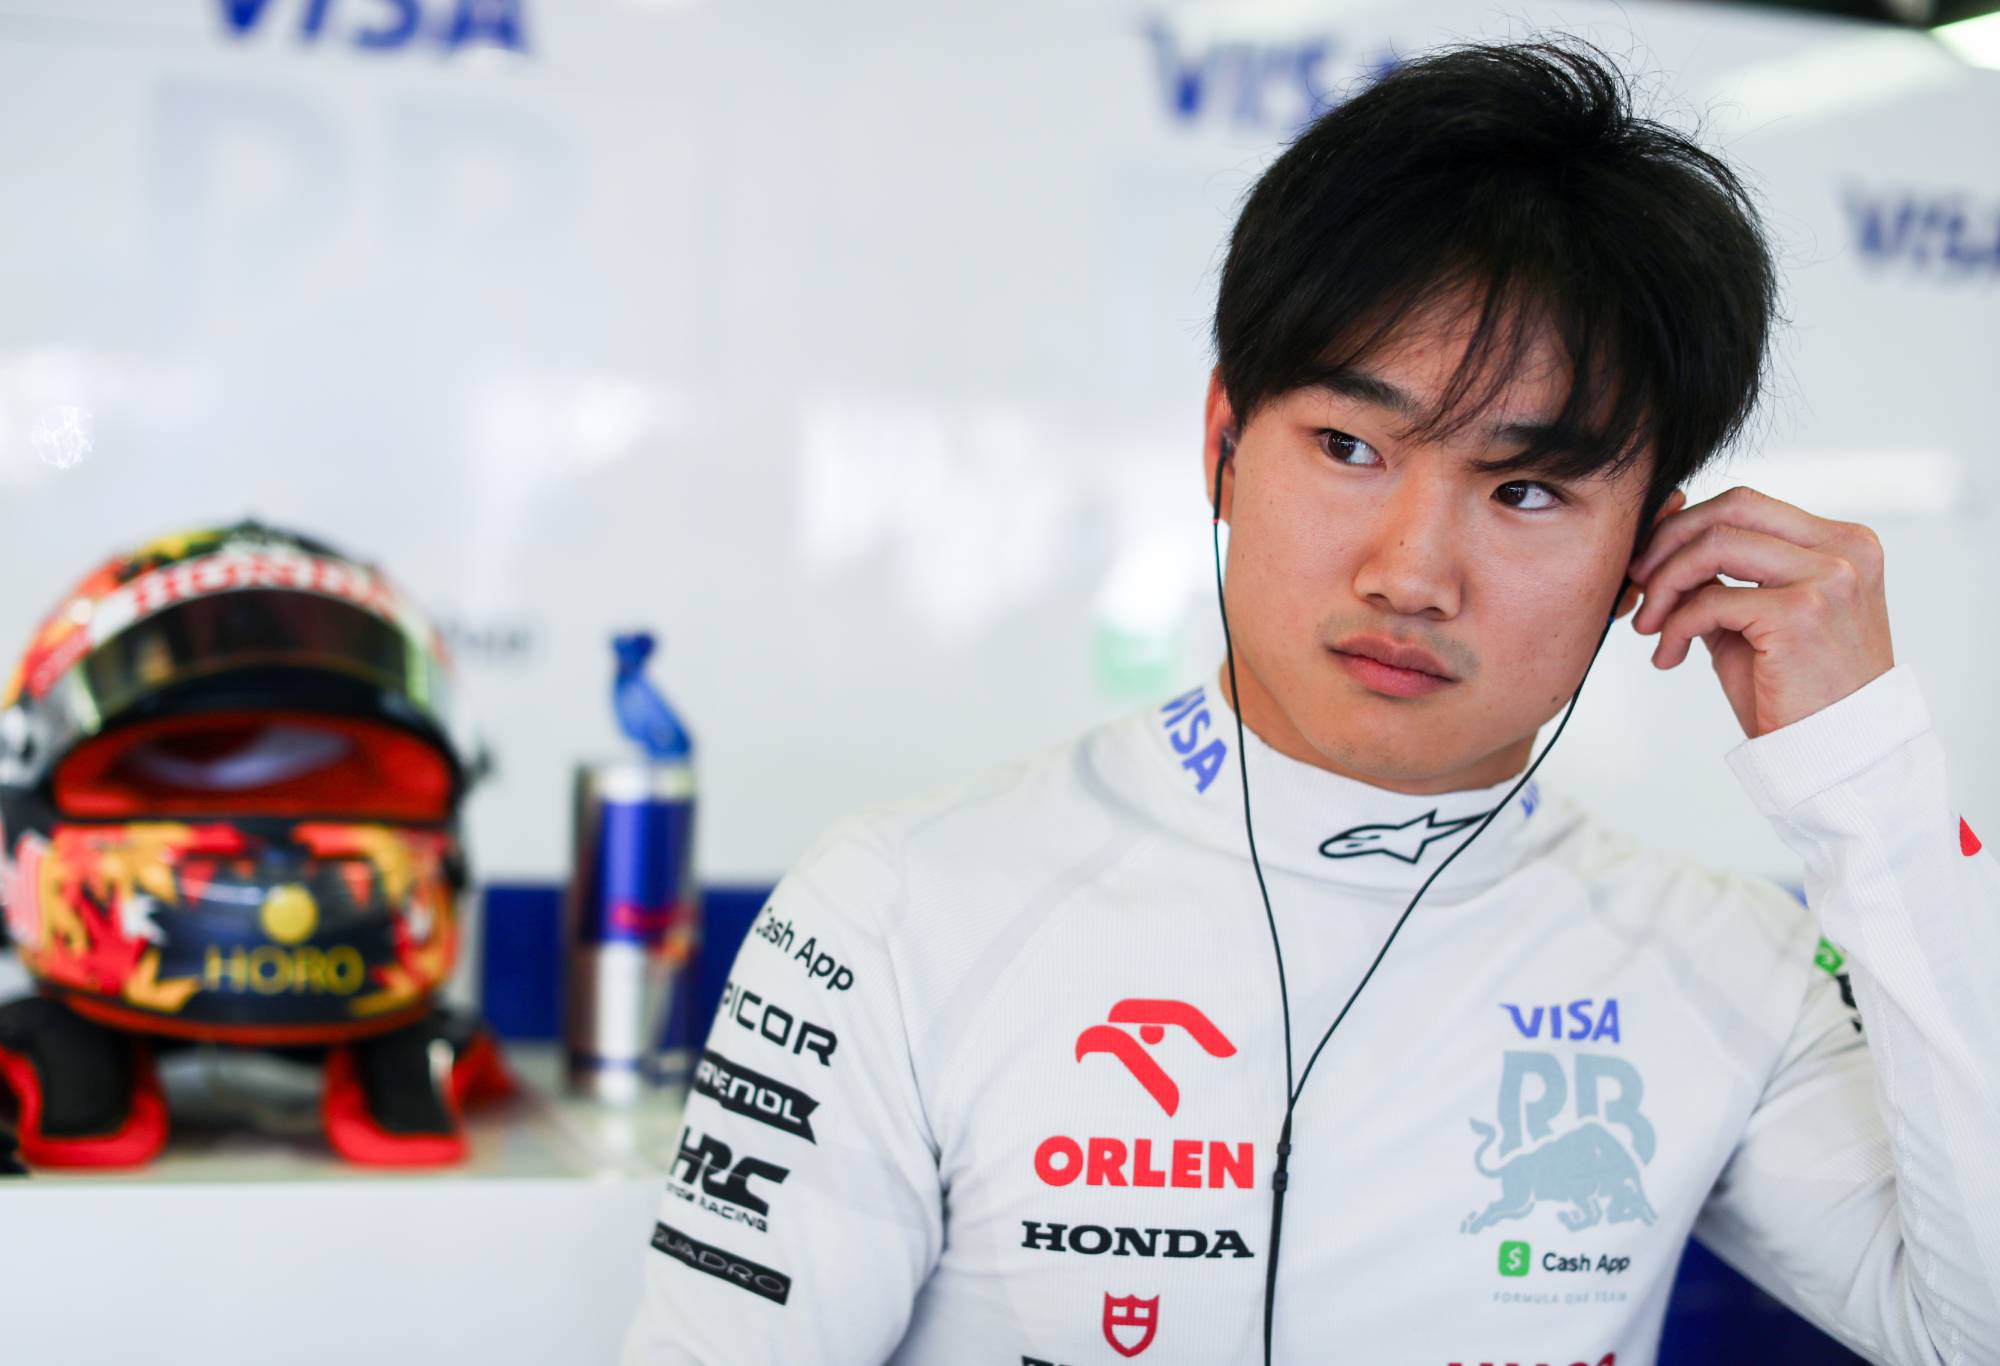 Yuki Tsunoda of Scuderia Visa Cash App RB during qualifying ahead of the F1 Grand Prix of Australia at Albert Park Circuit on March 23, 2024 in Melbourne, Australia. (Photo by Peter Fox/Getty Images)